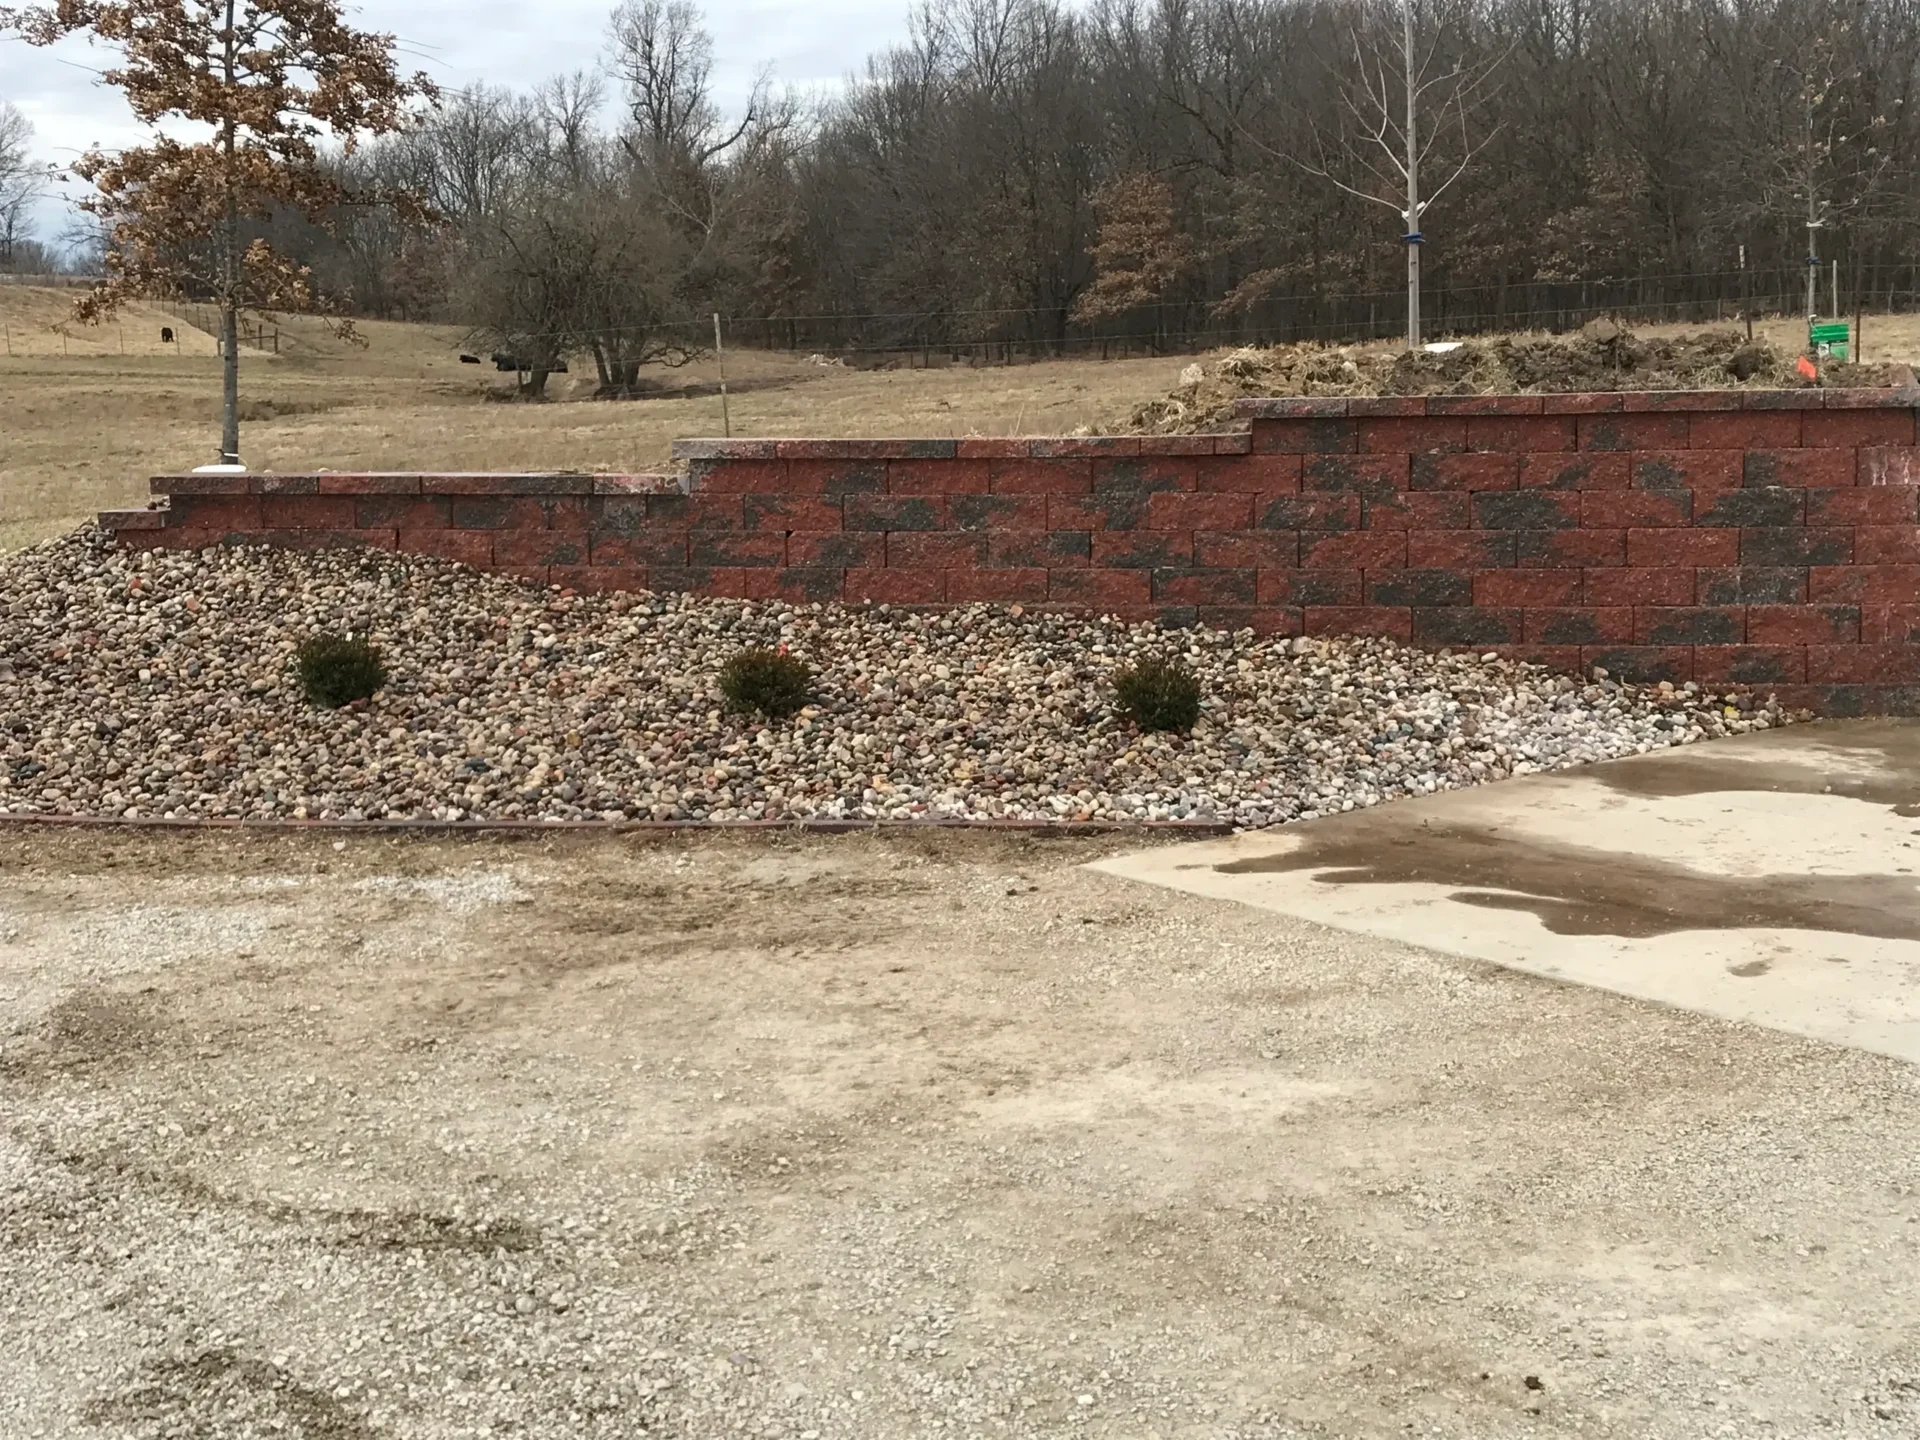 A large brick wall in the middle of an empty lot.